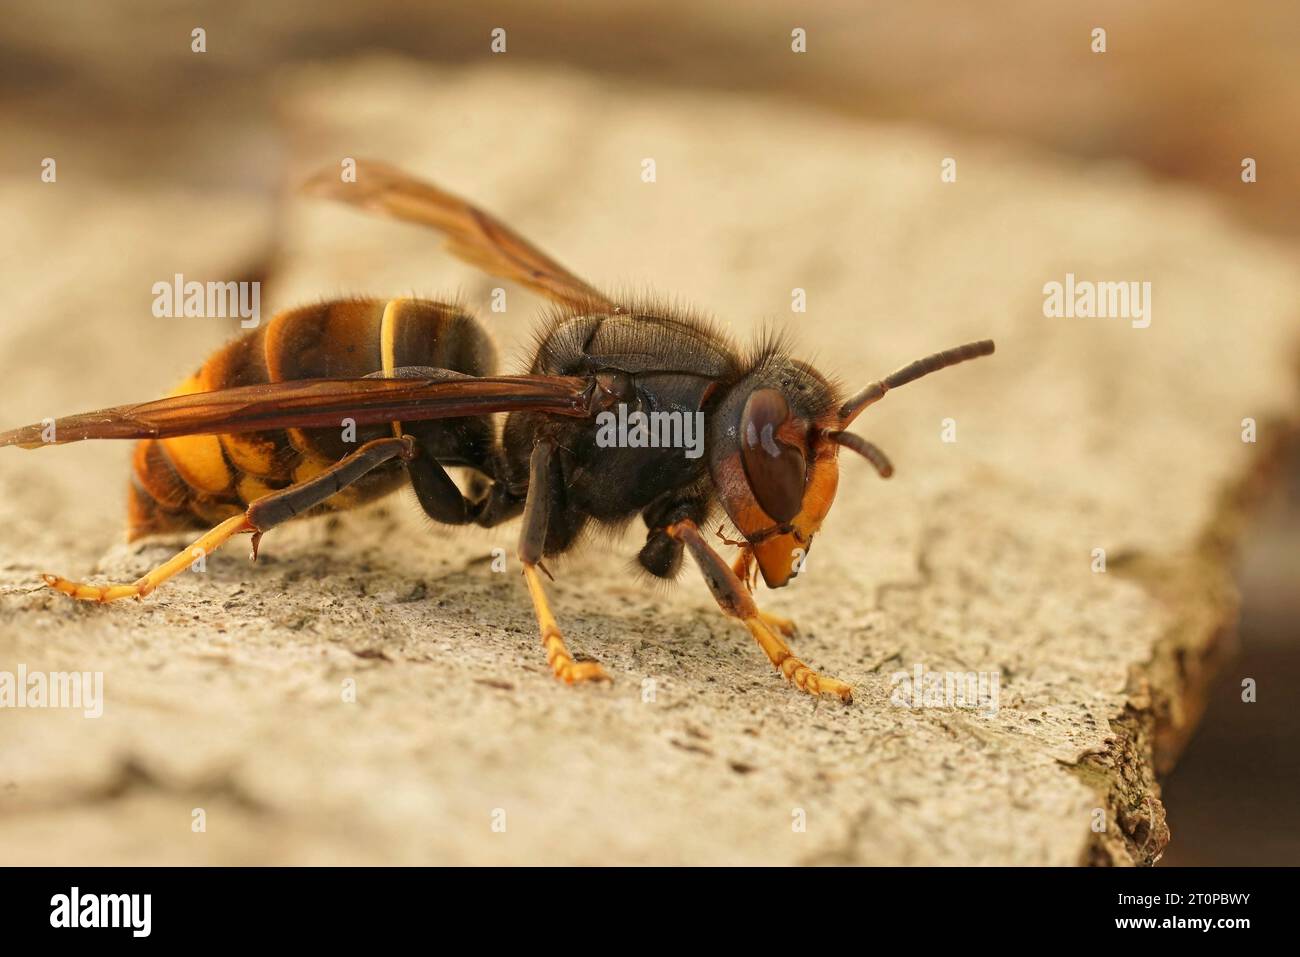 Natural closeup on a worker of the invasive Asian hornet pest species, Vespa velutina, a major threat for beekeeping Stock Photo